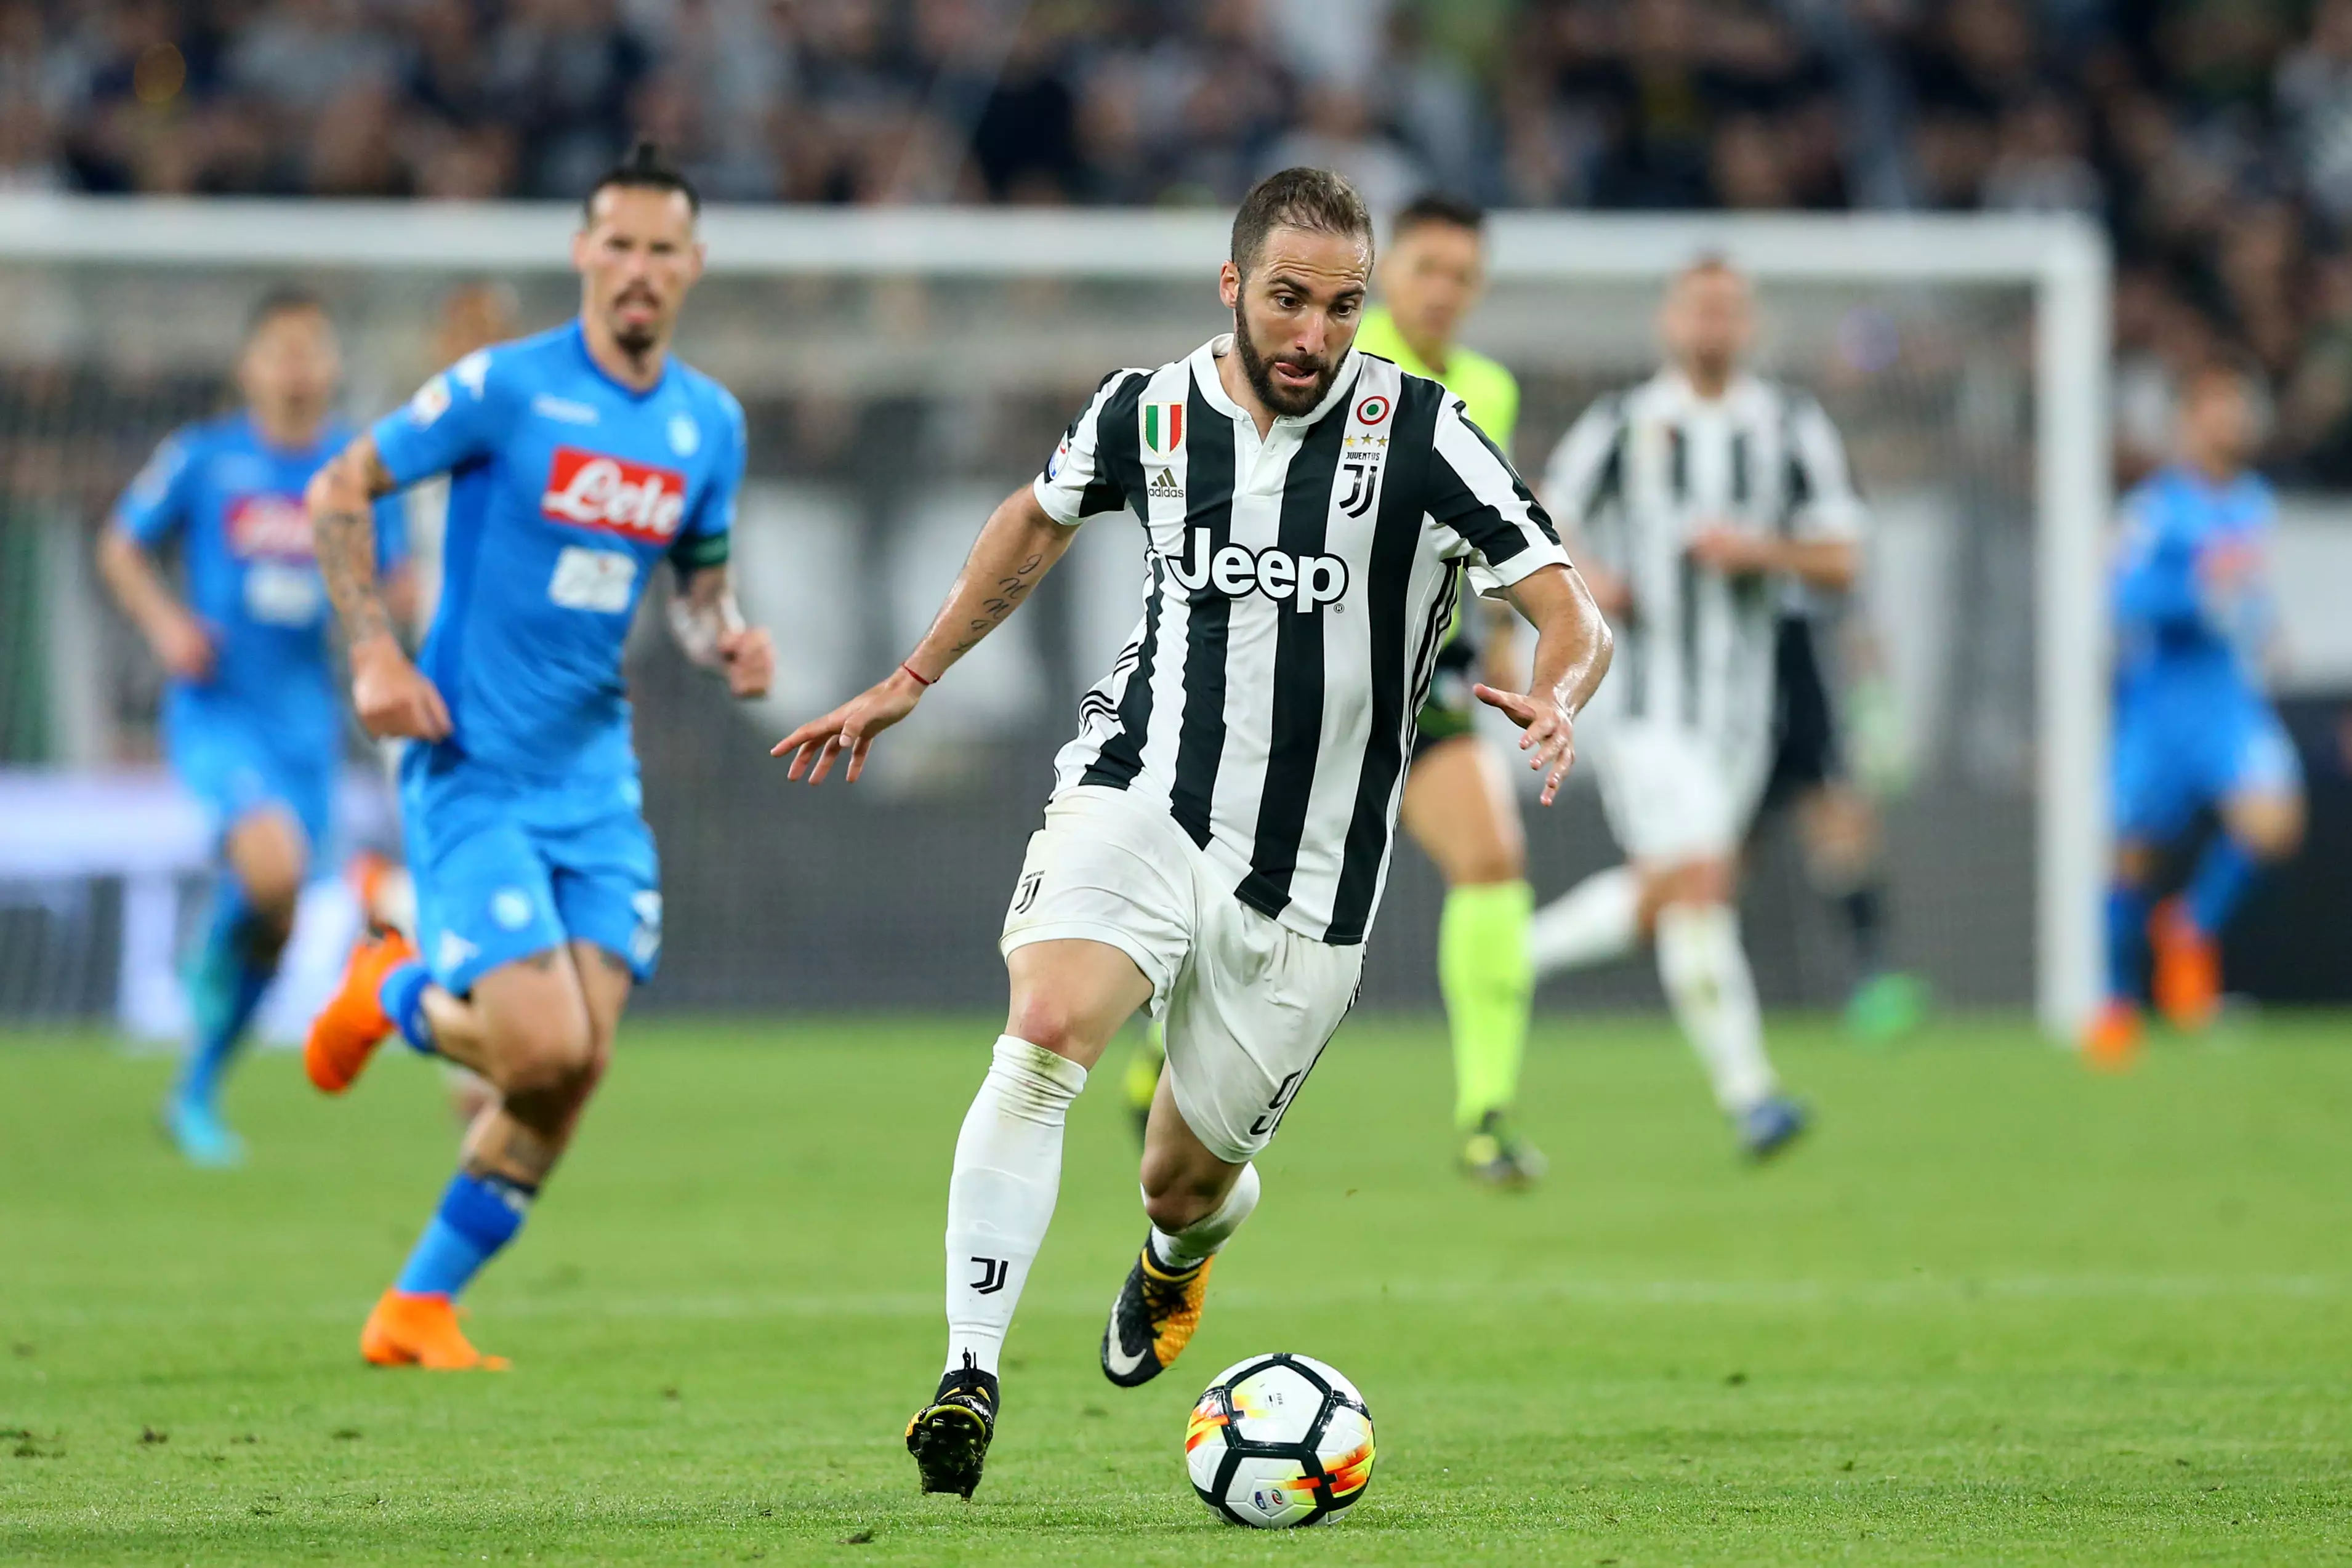 Higuain in action for Juventus. Image: PA